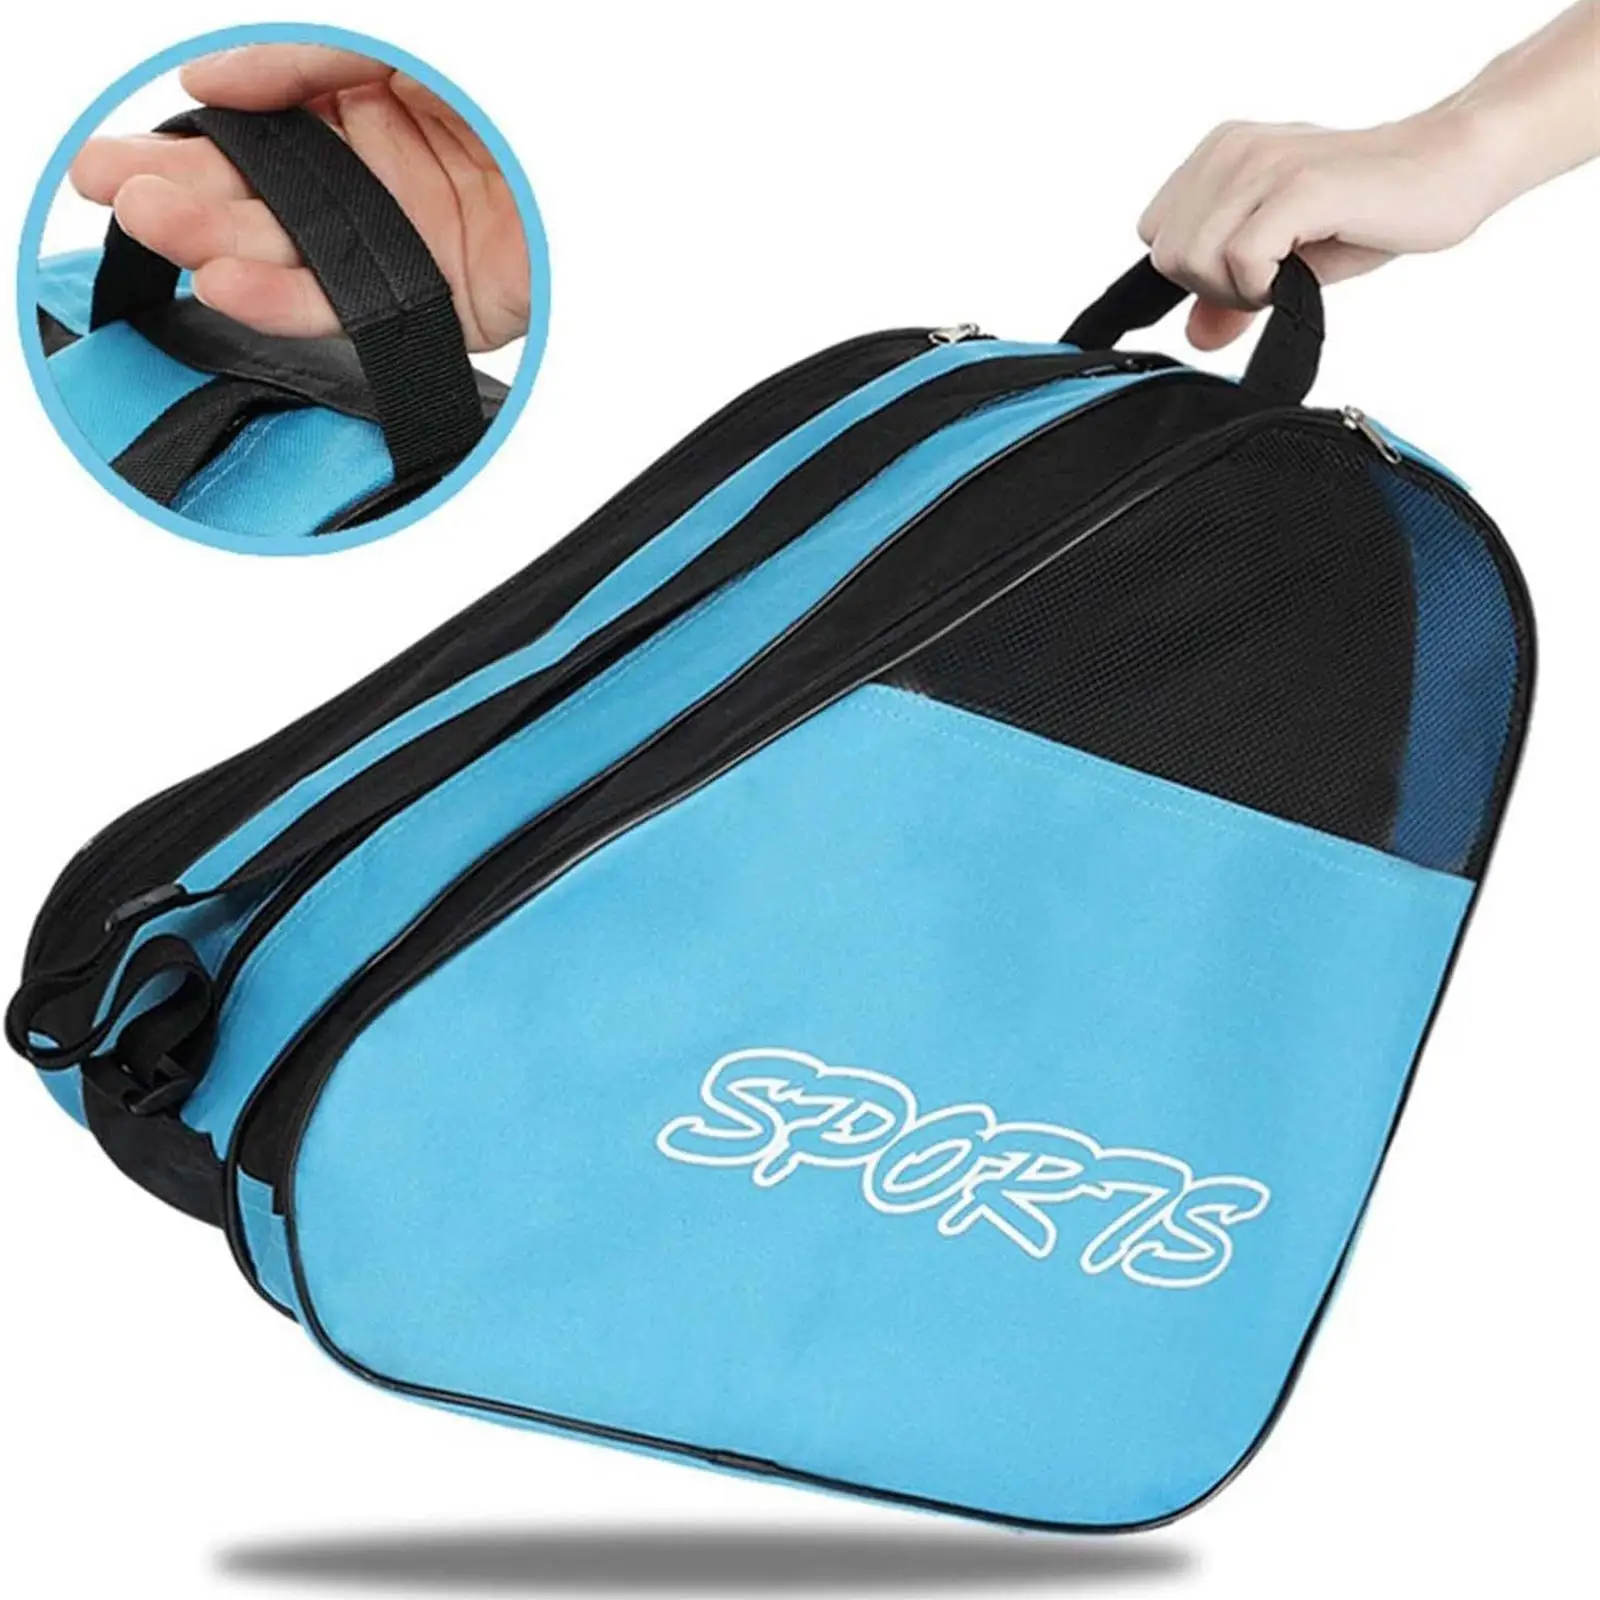 Roller Skating Bag Sports Accessories Portable Adjustable Ice Inline Roller Skate Fashion Bags With Large Capacity Pockets